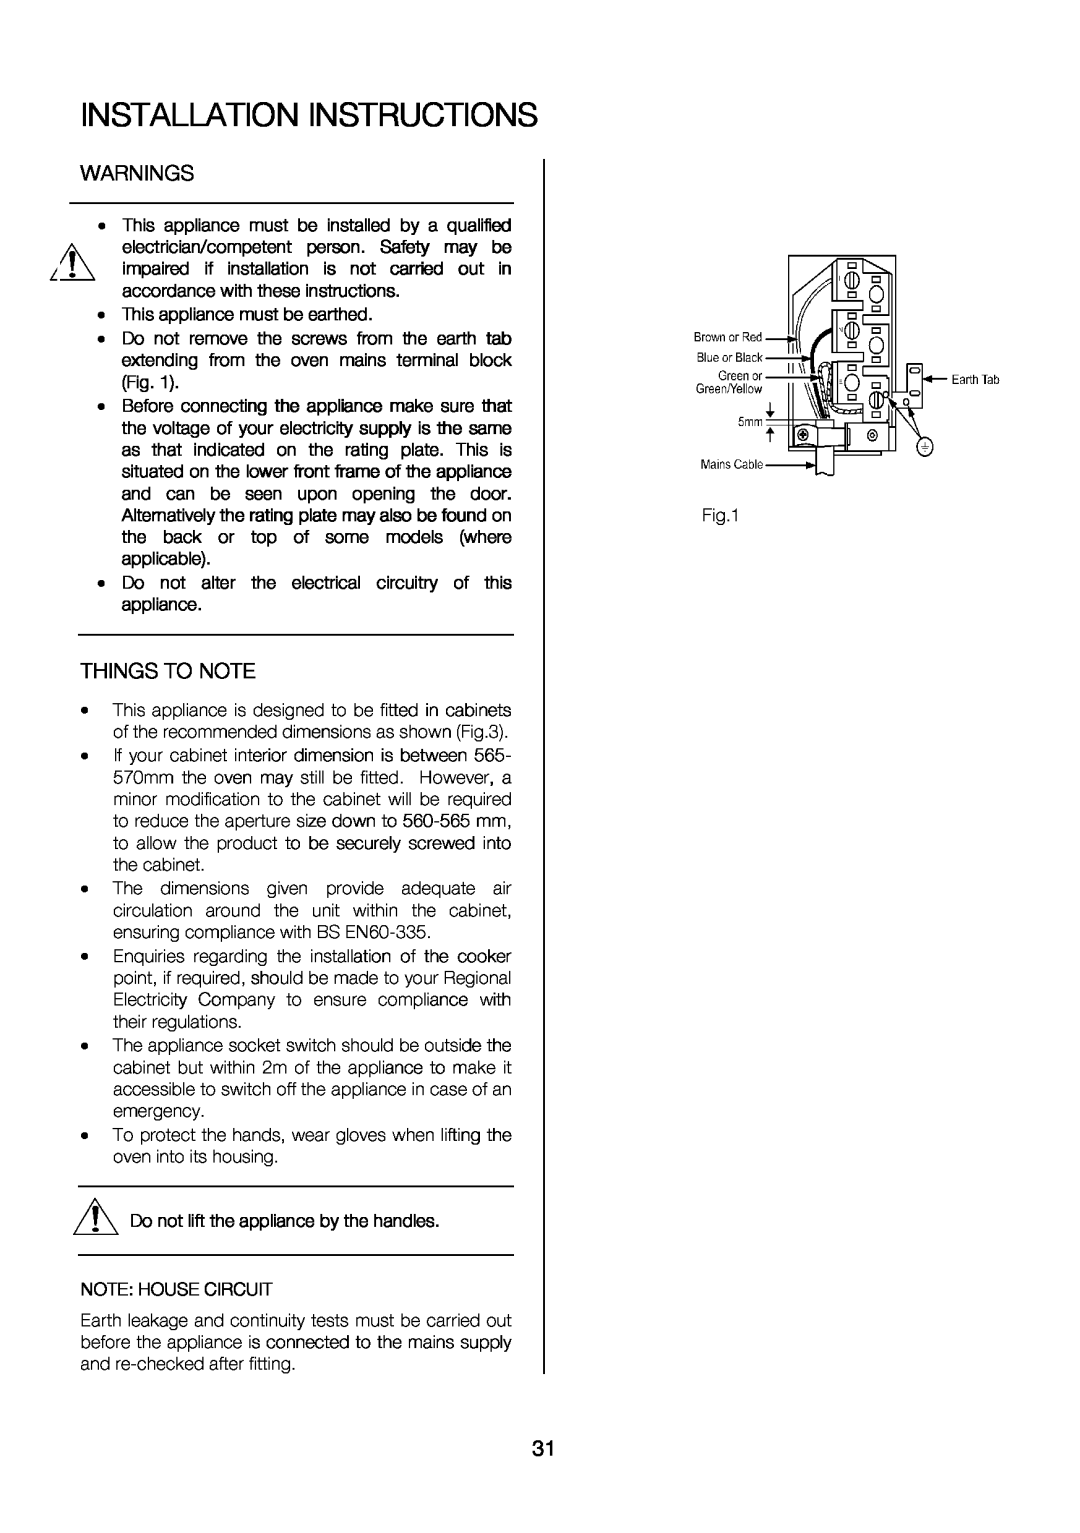 Electrolux EKC6047 Warnings, Installation Instructions, screws opening, THINGSDonotTO.NOTEheelectricalcircuitryofthis 